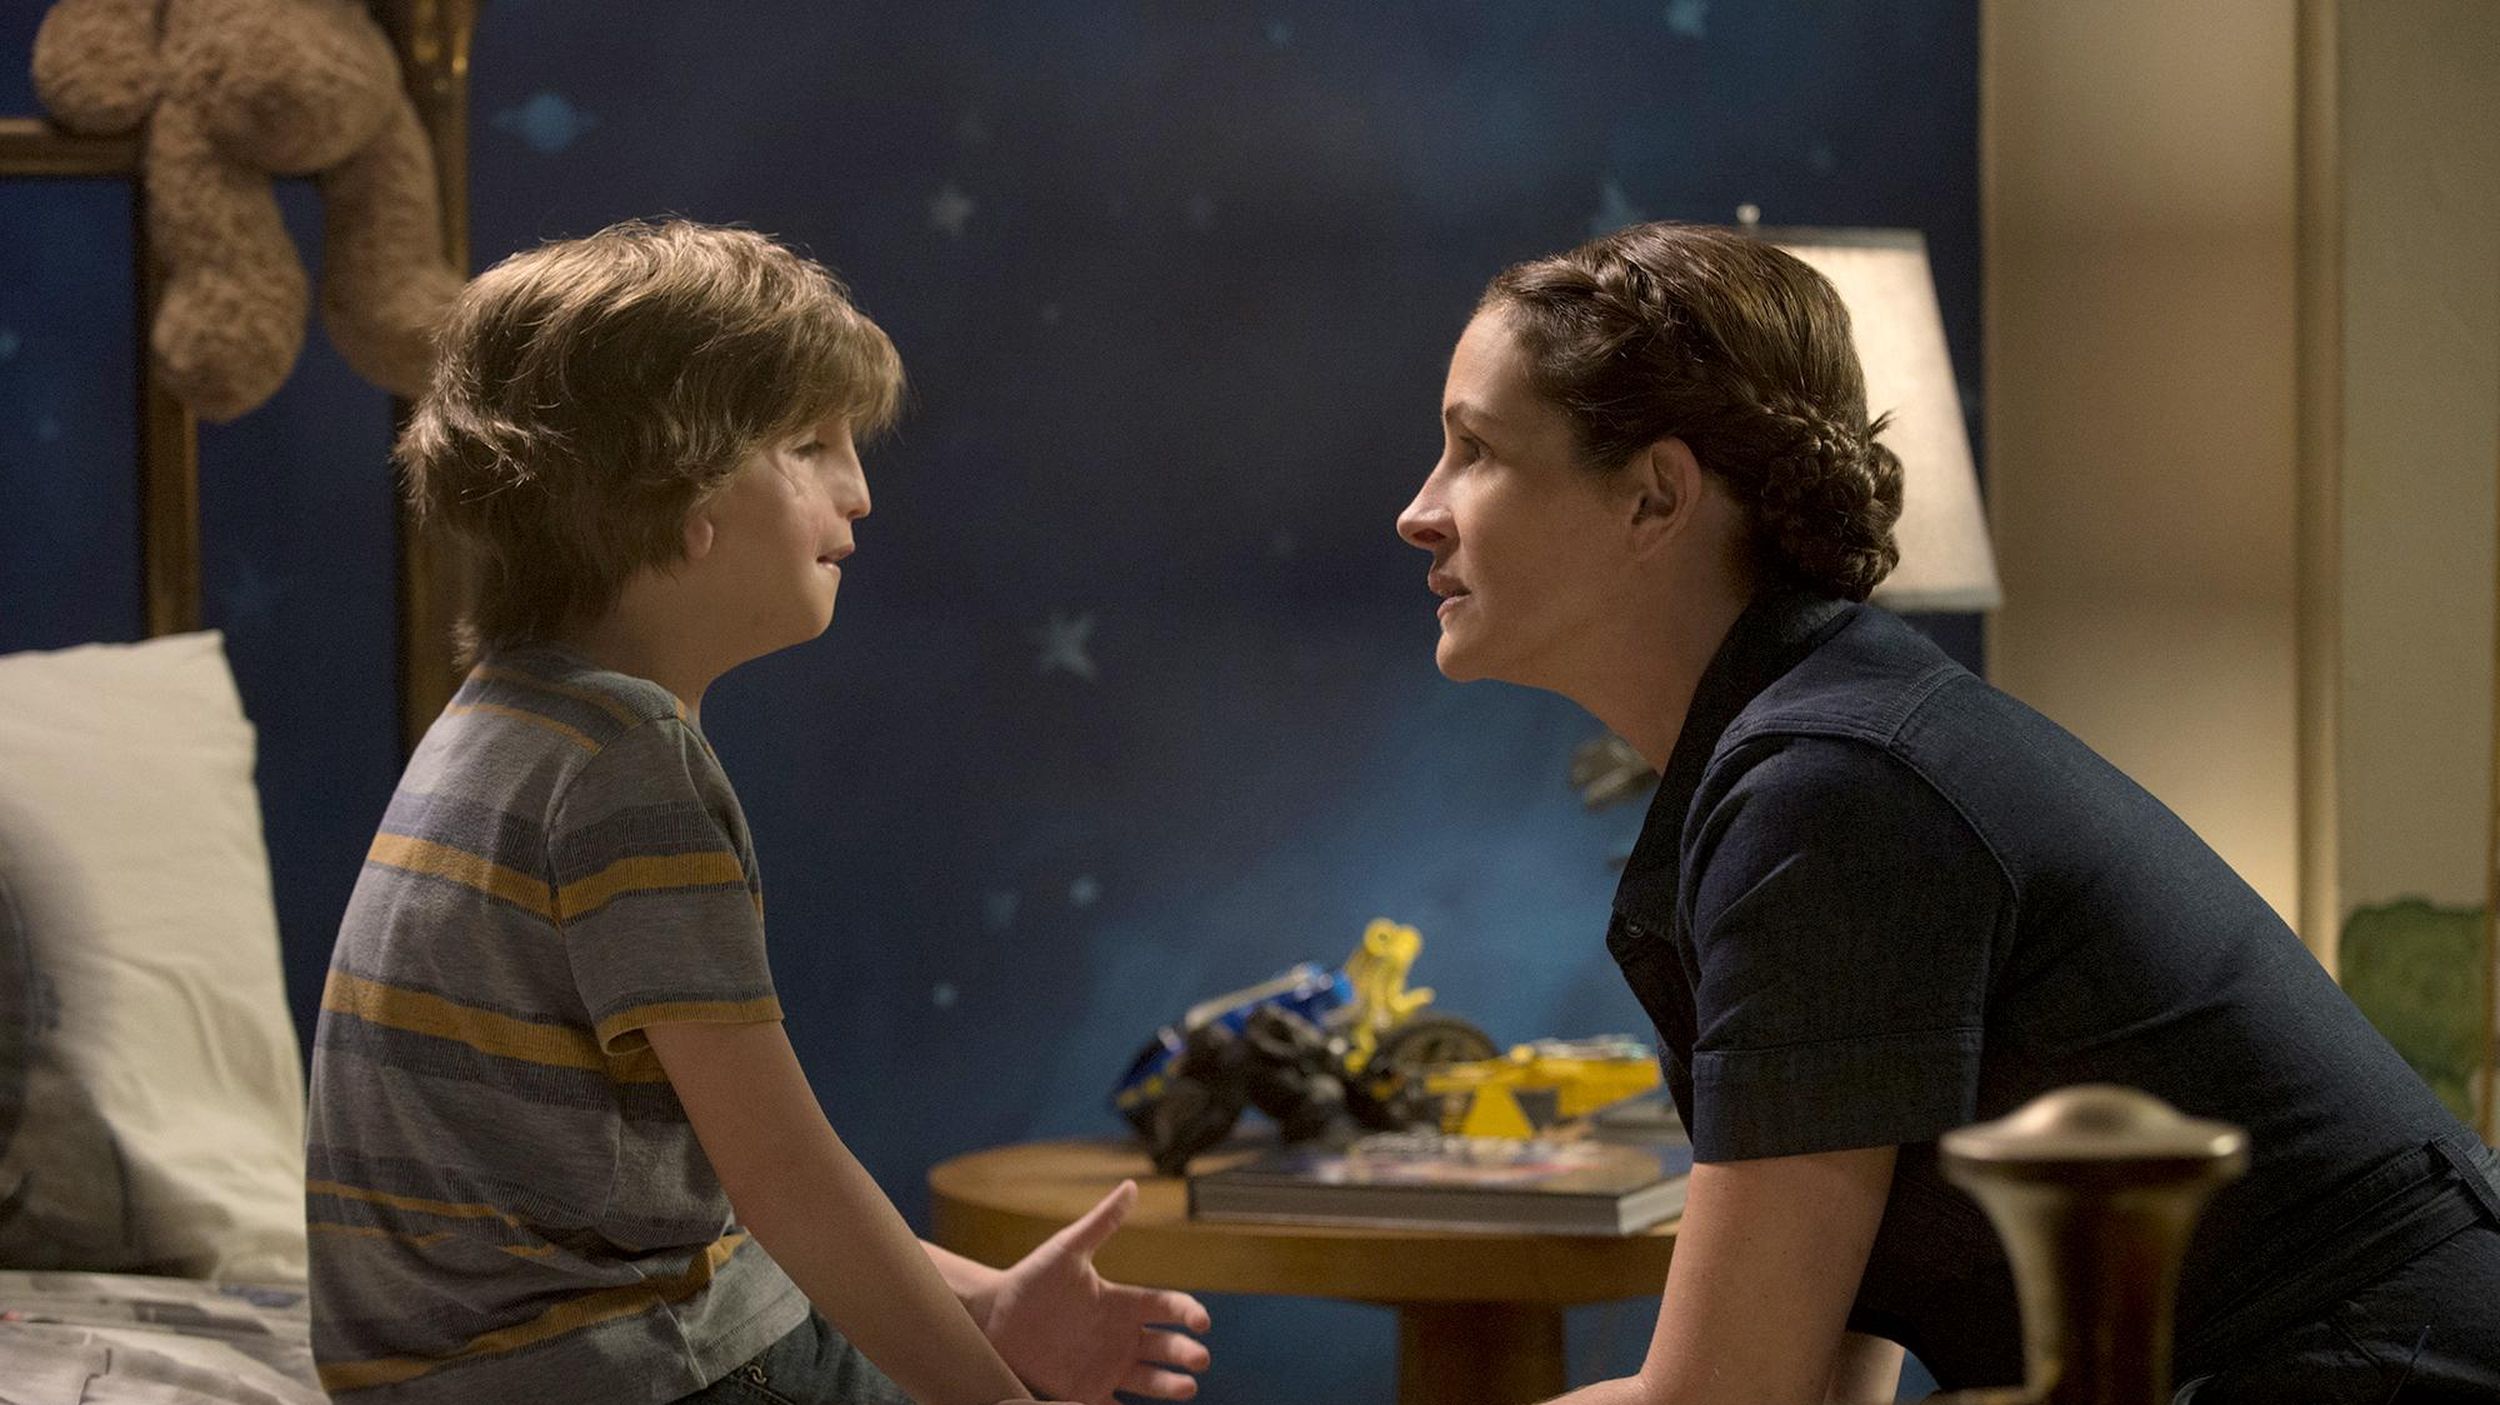 Review: 'Wonder' is the cry-fest you expect, but it's also complex, funny  and probing